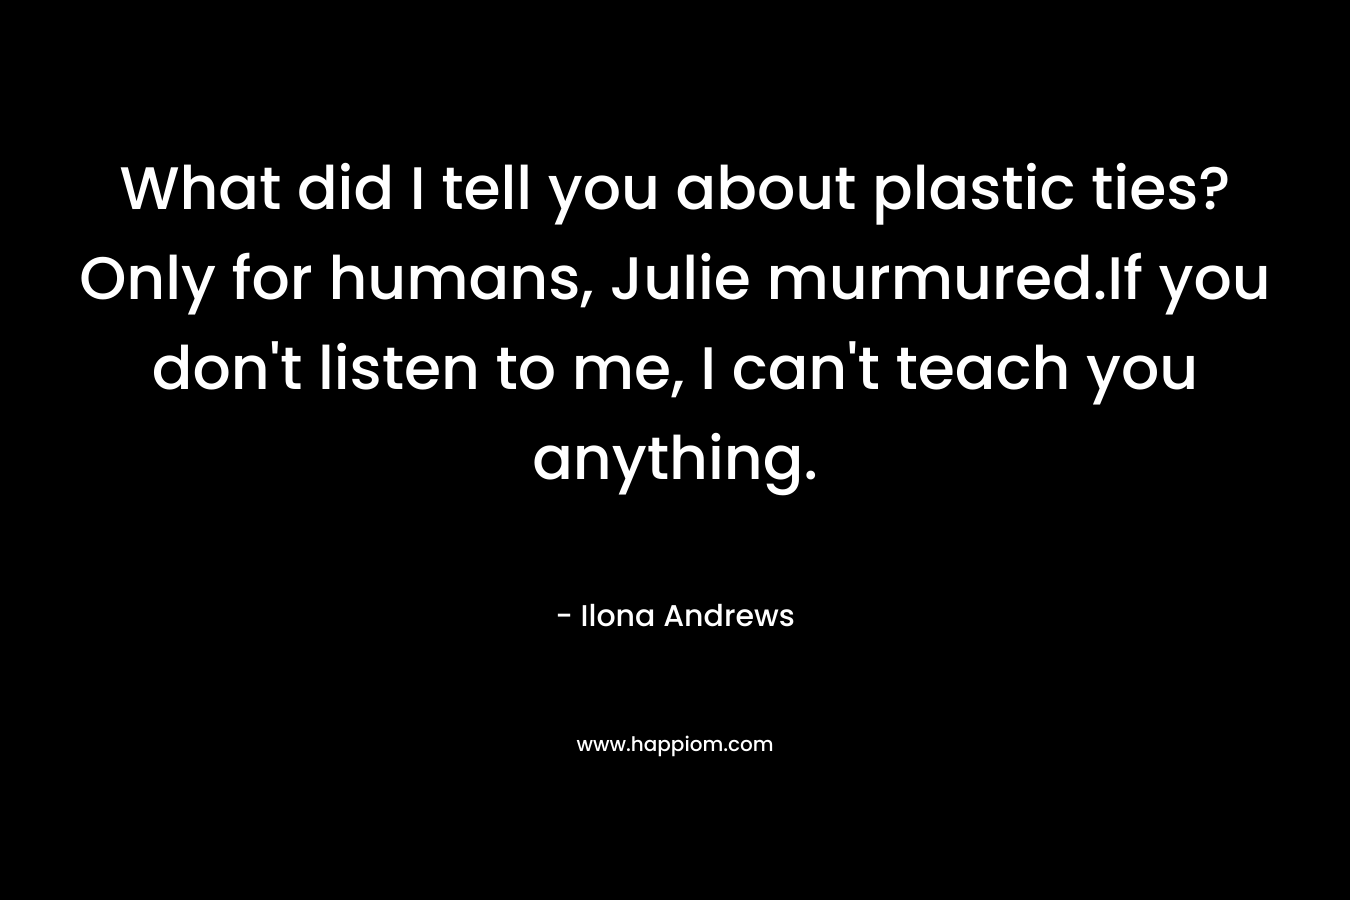 What did I tell you about plastic ties? Only for humans, Julie murmured.If you don’t listen to me, I can’t teach you anything. – Ilona Andrews